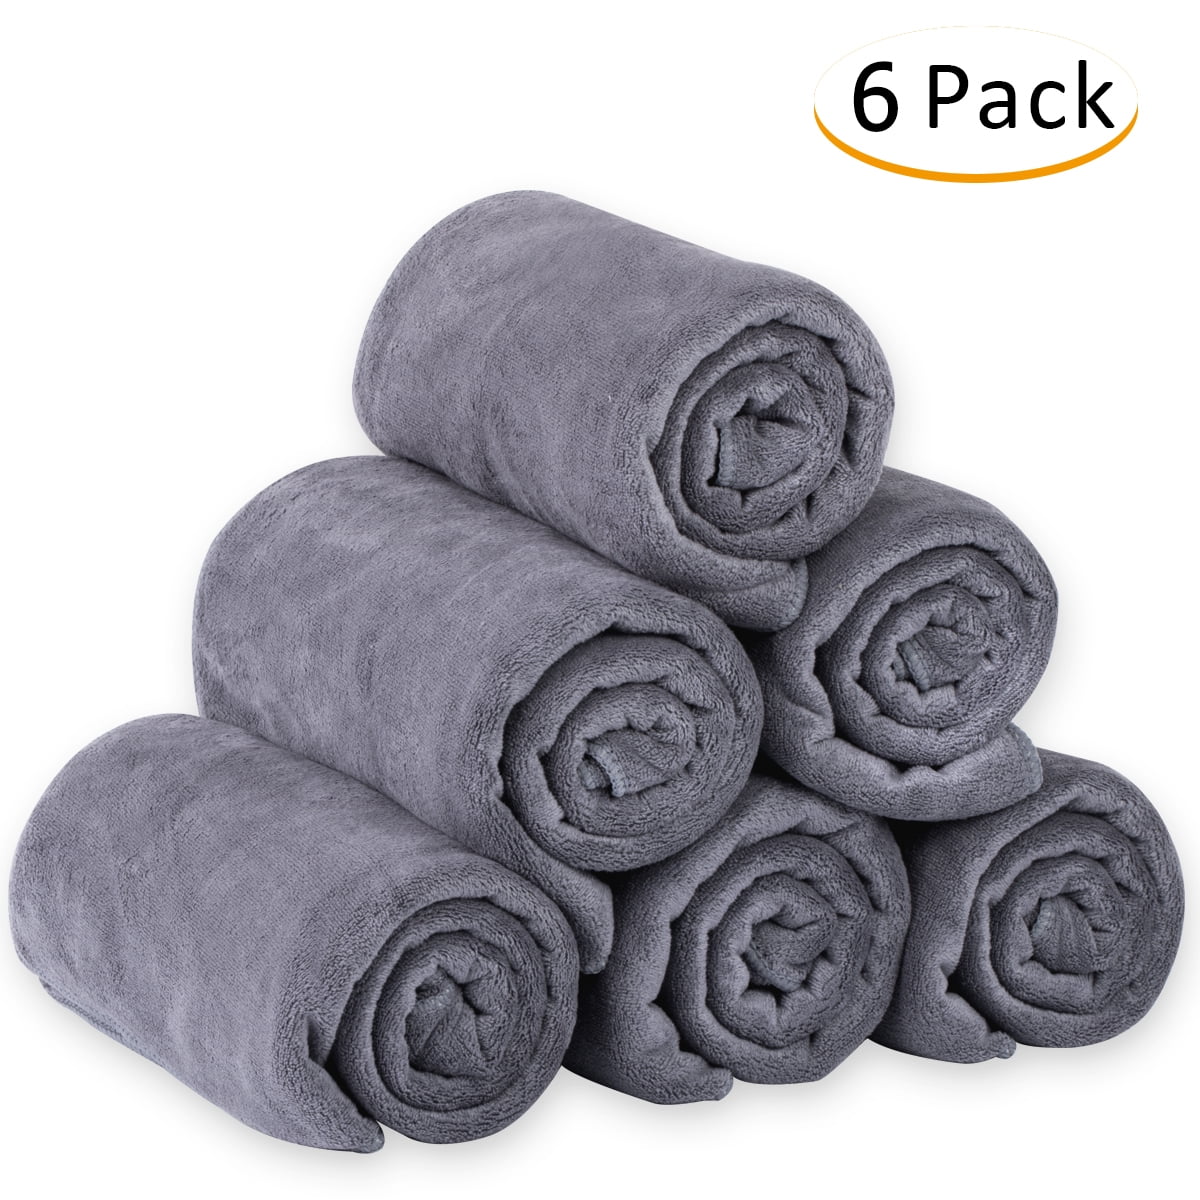 KinHwa Microfiber Hand Towel Ultra Soft Large Hand Towels for Bathroom  Super Absorbent for SPA Face Shower and Sports 2 Pack Dark-Gray